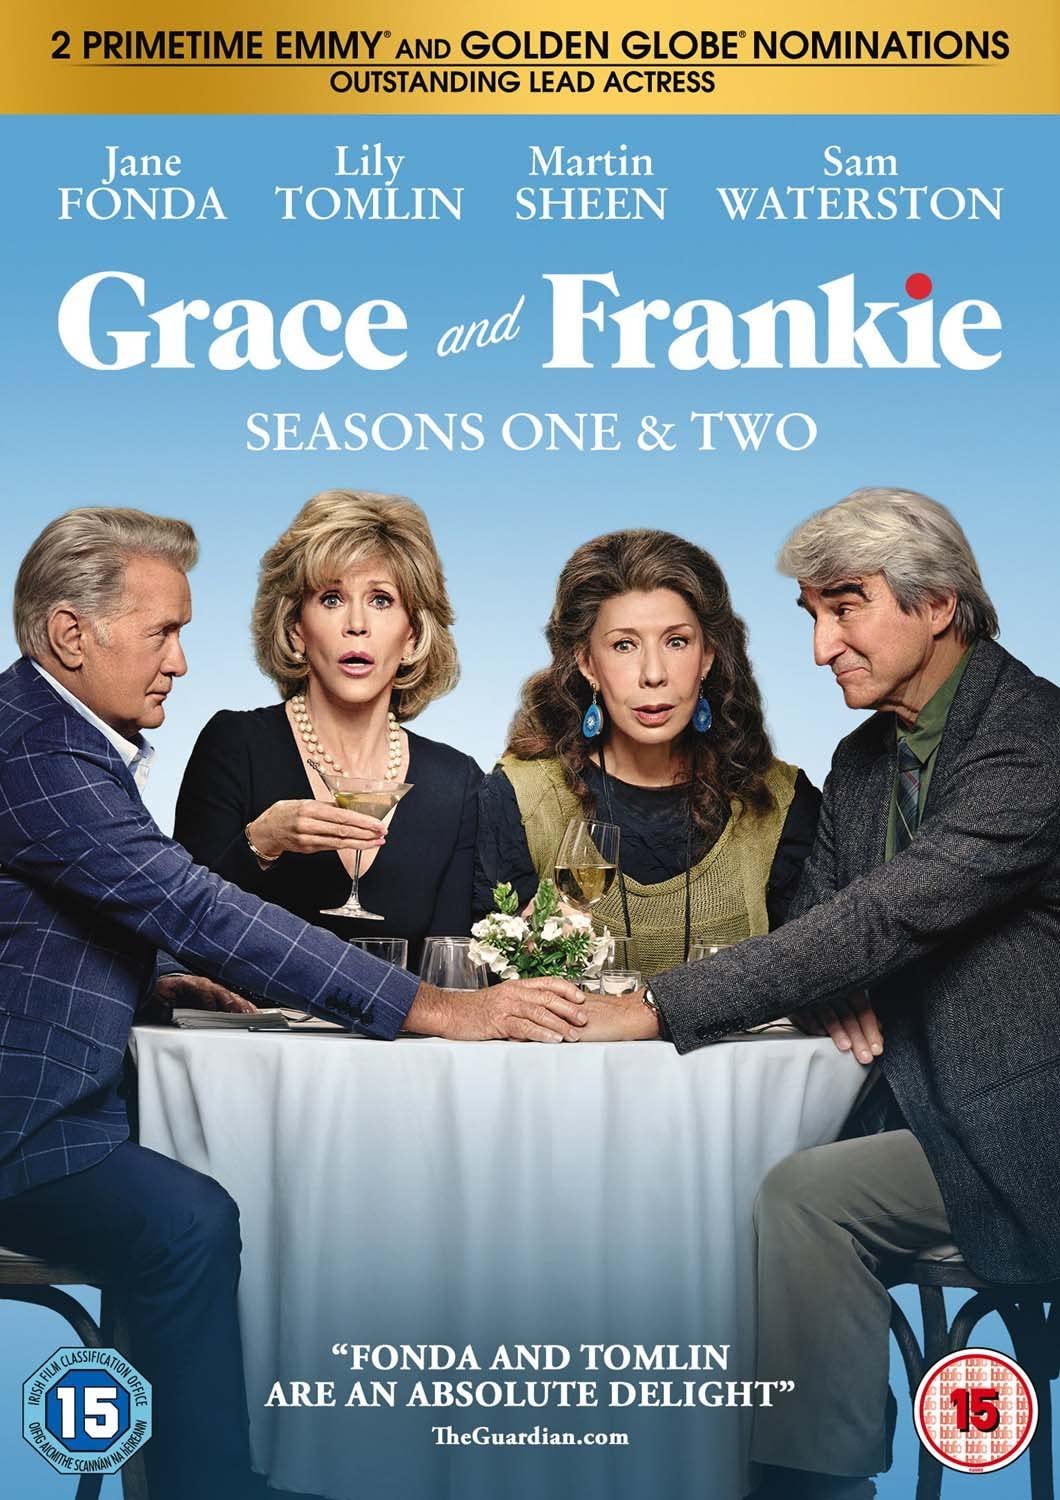 Grace and Frankie Seasons 1-2 - Television comedy [DVD]